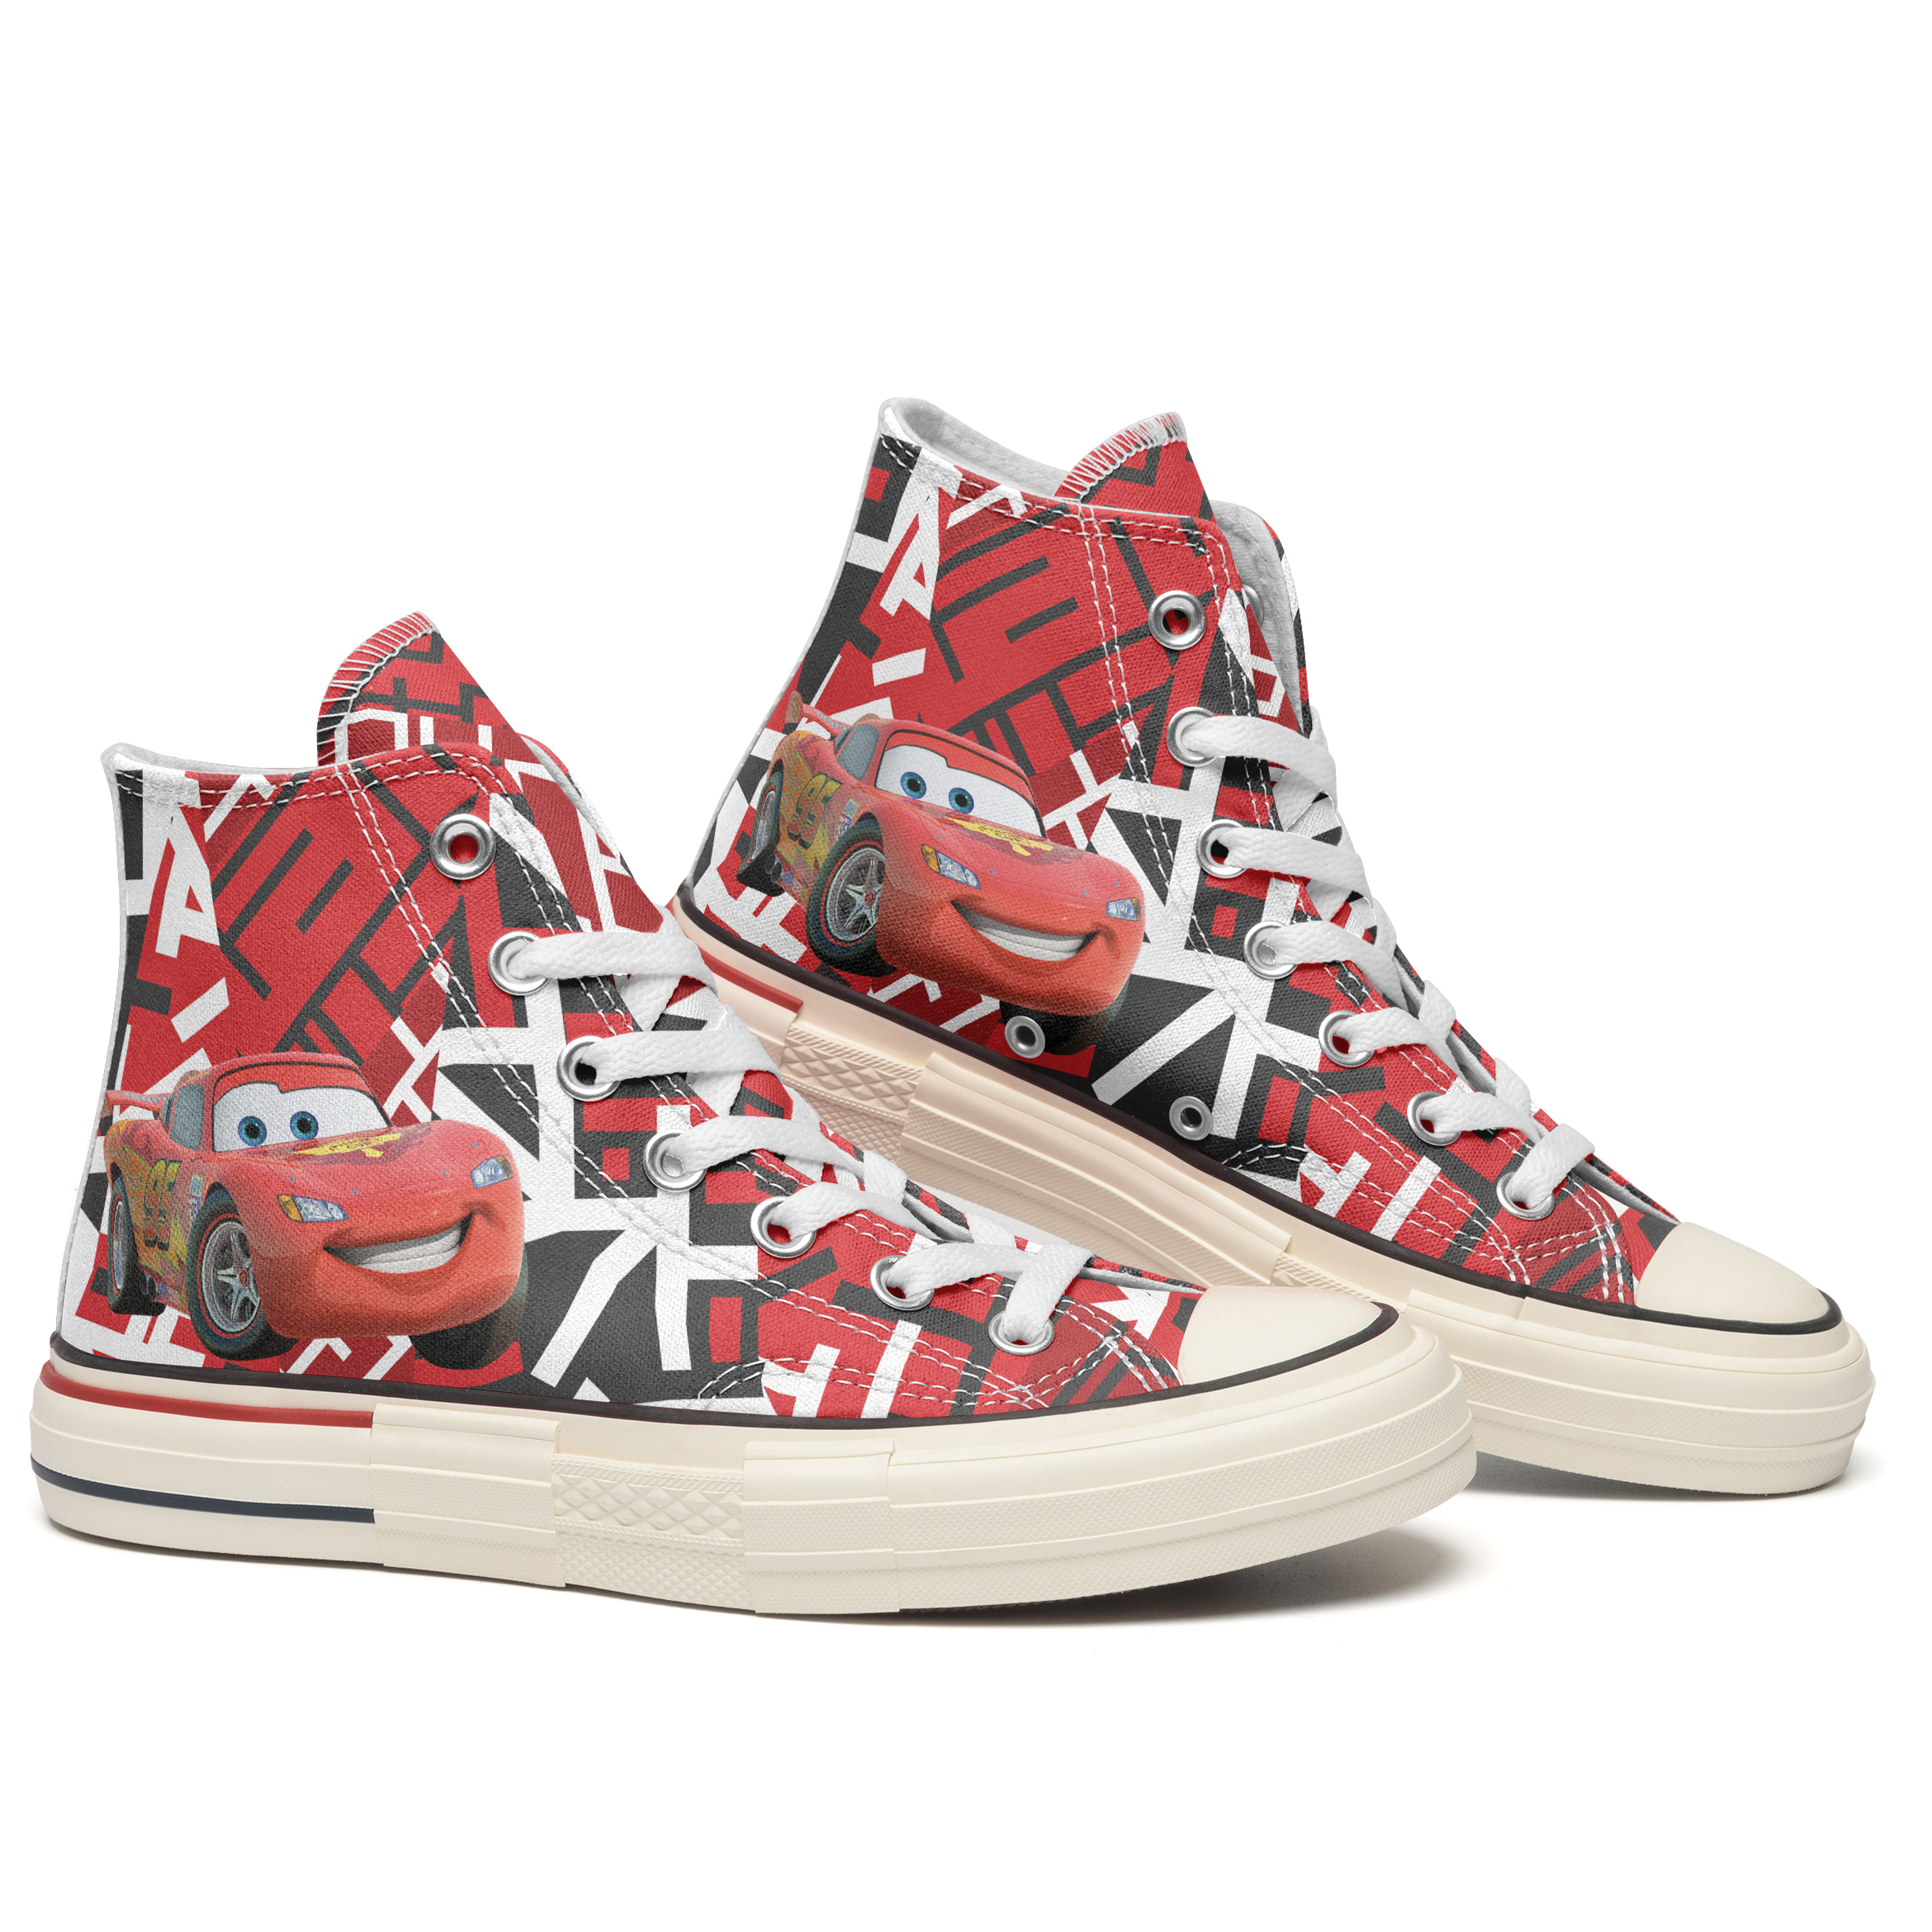 Betty Boop High Top Canvas Shoes Special Edition